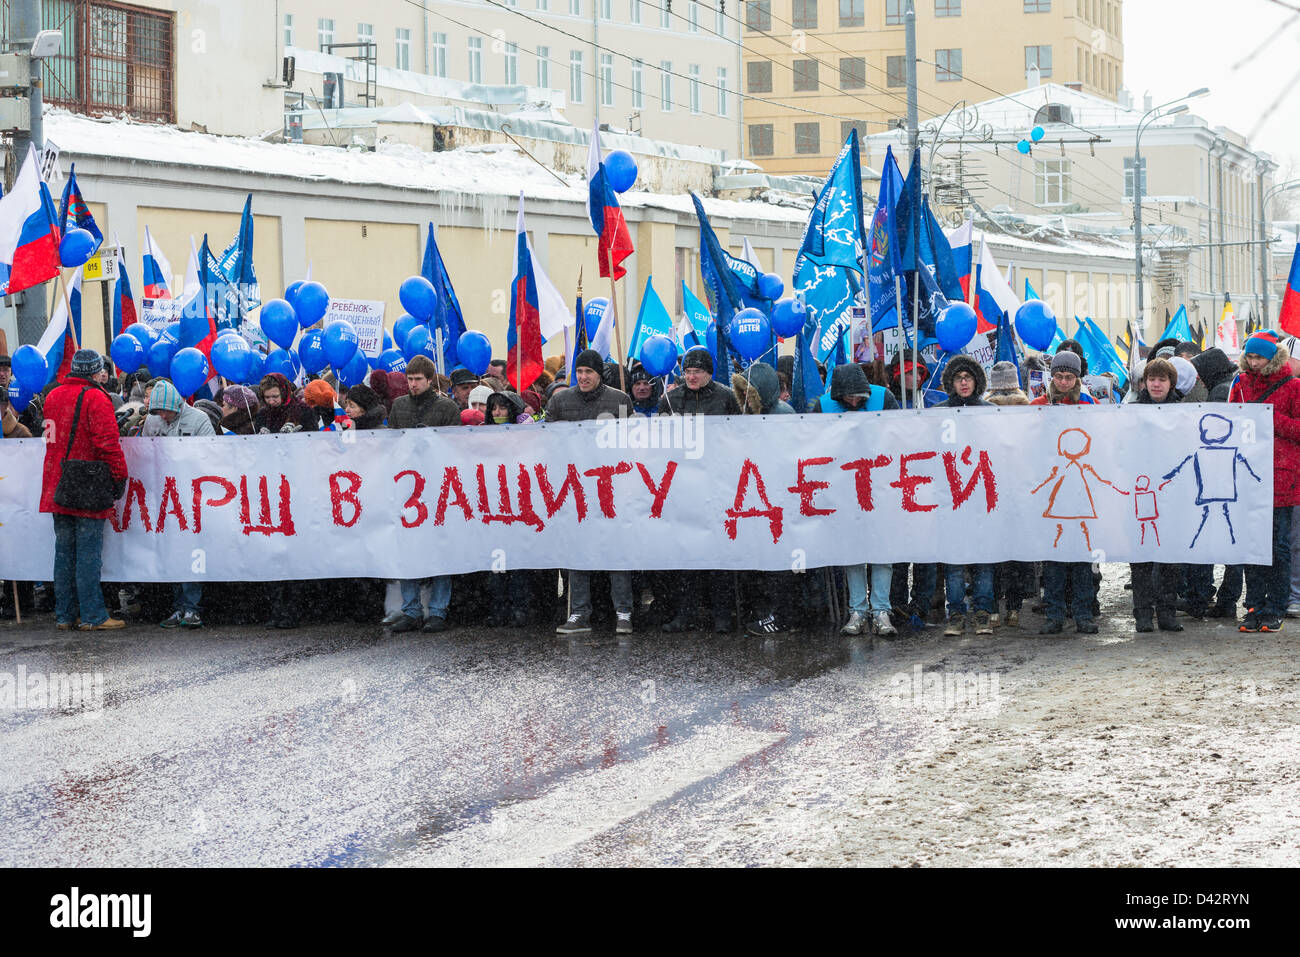 Russian demonstrators rally in support of U.S. adoption ban. Moscow, March 2, 2013 Stock Photo